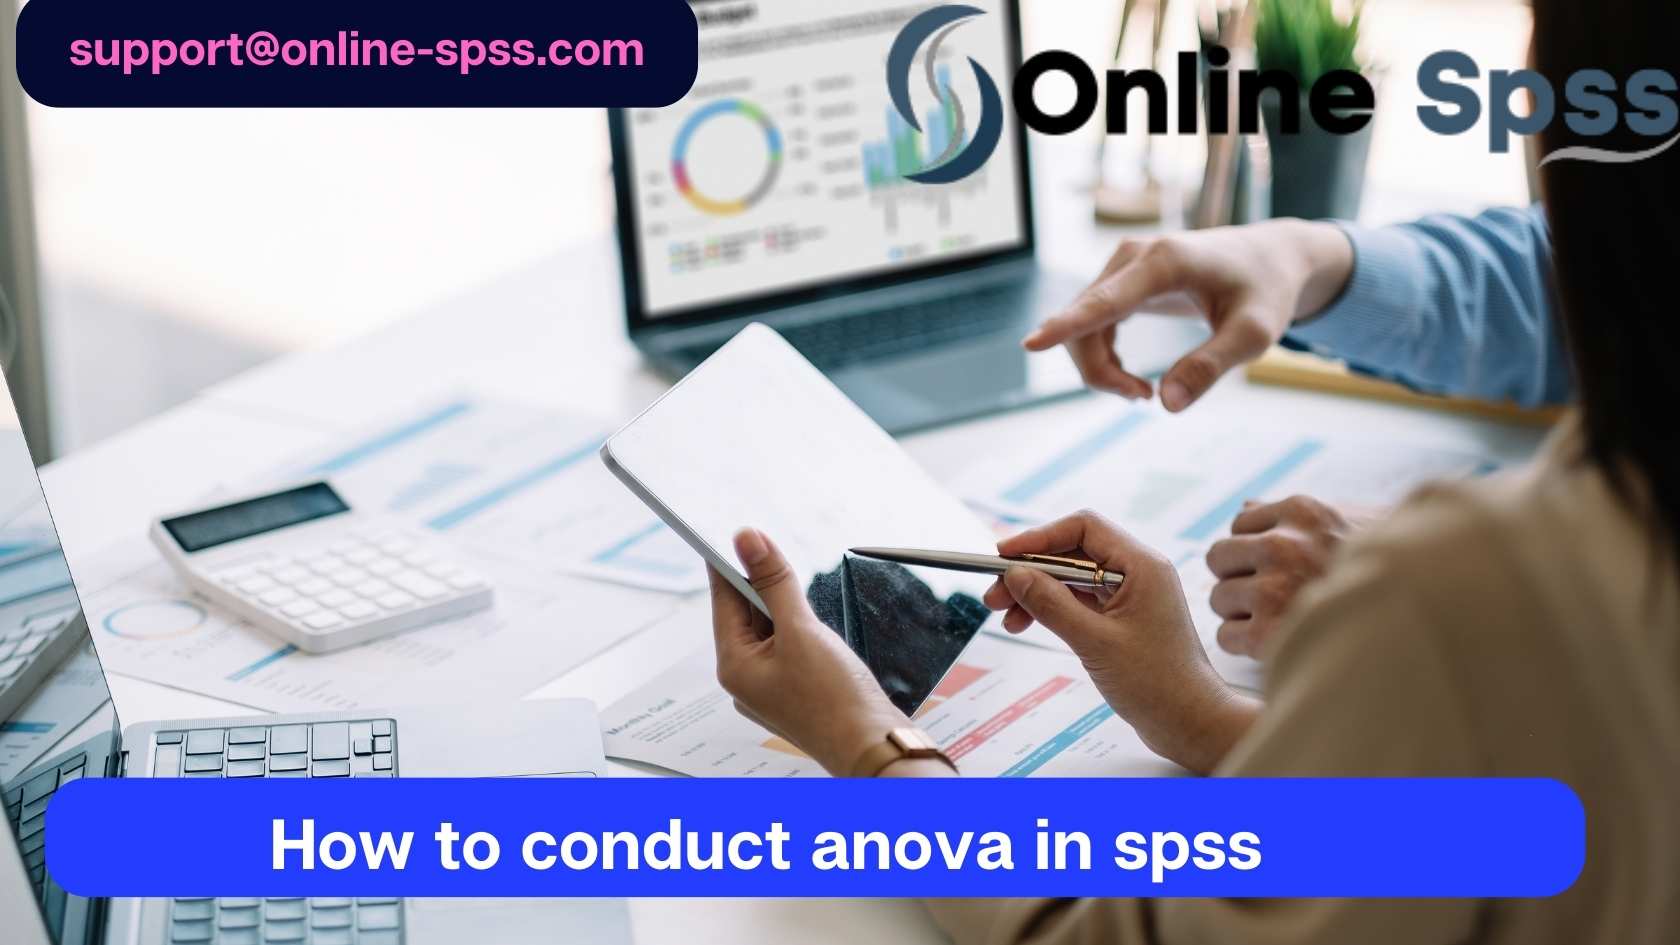 How to Run a one-way anova in spss